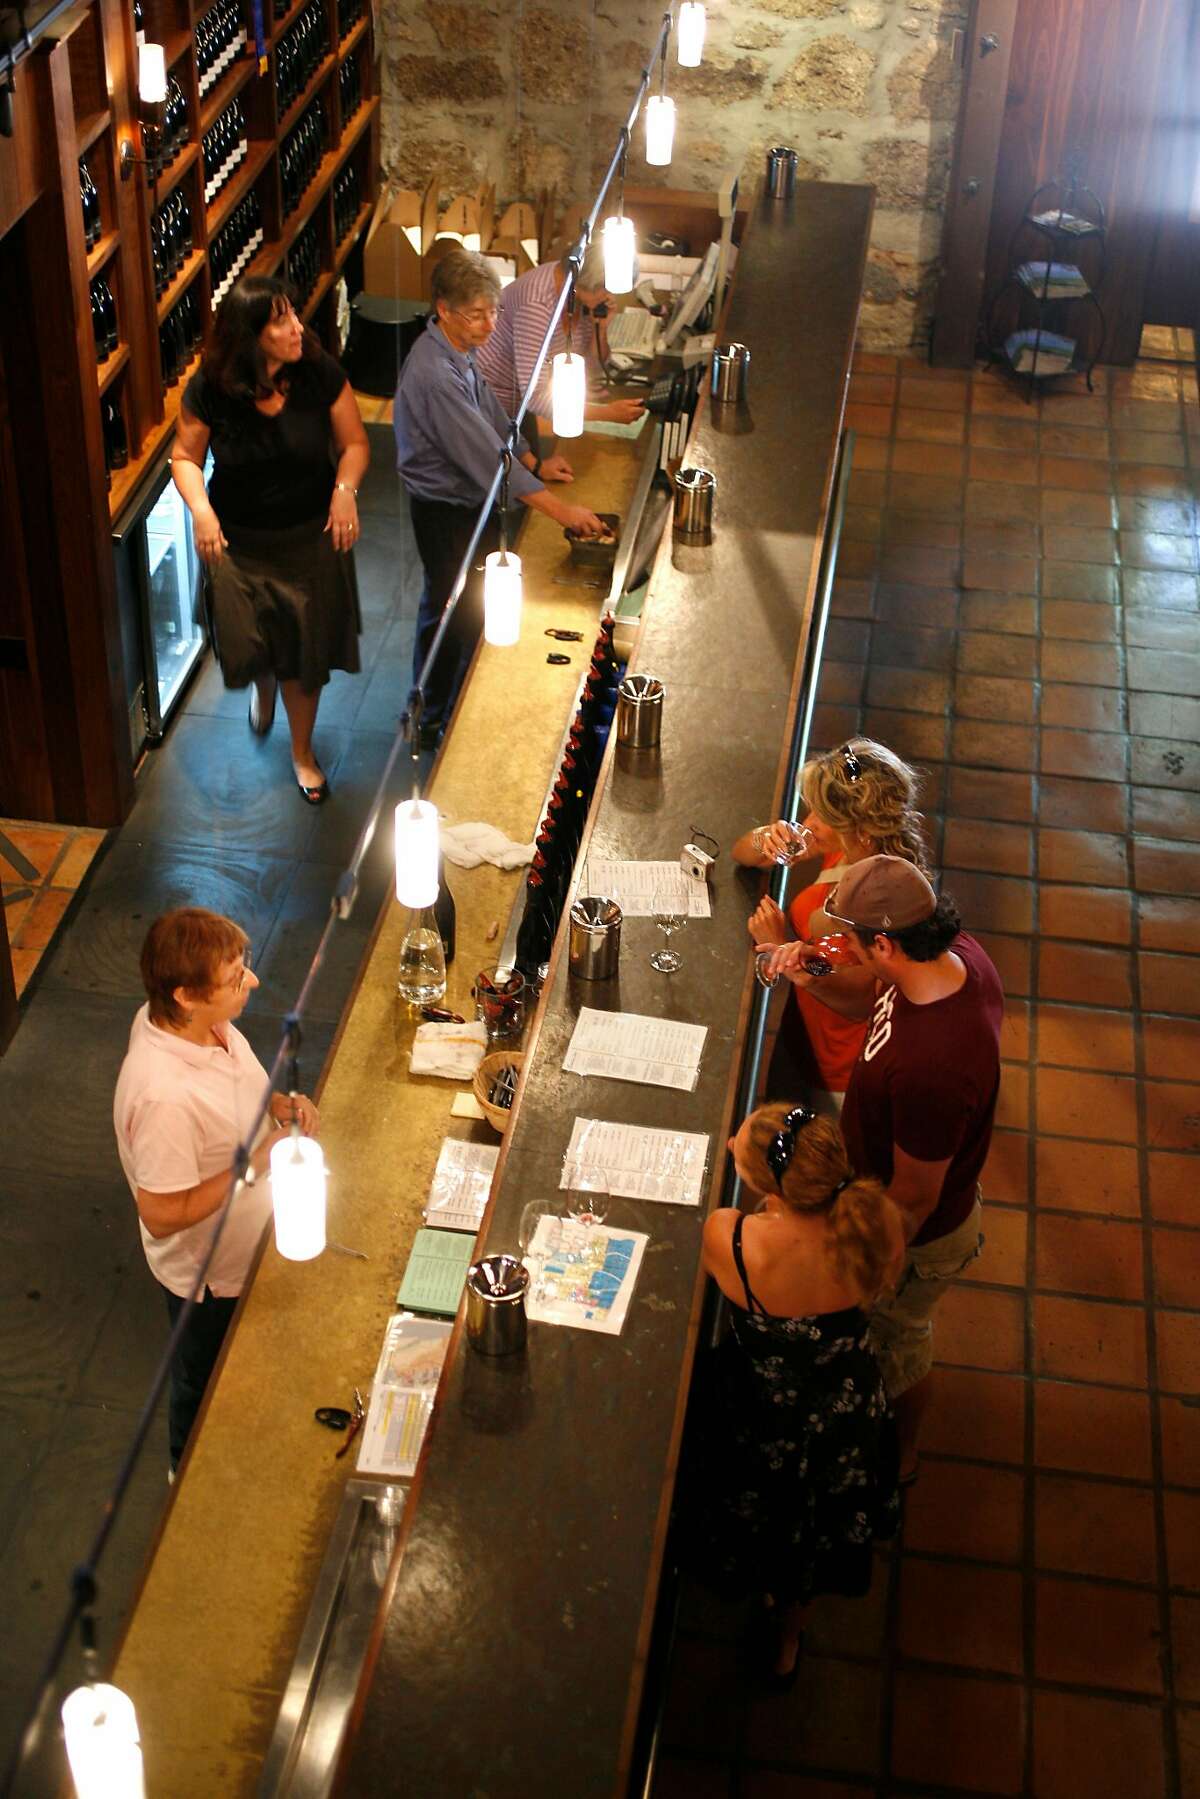 The tasting room at Buena Vista winery in Sonoma, Calif., on July 28, 2008.